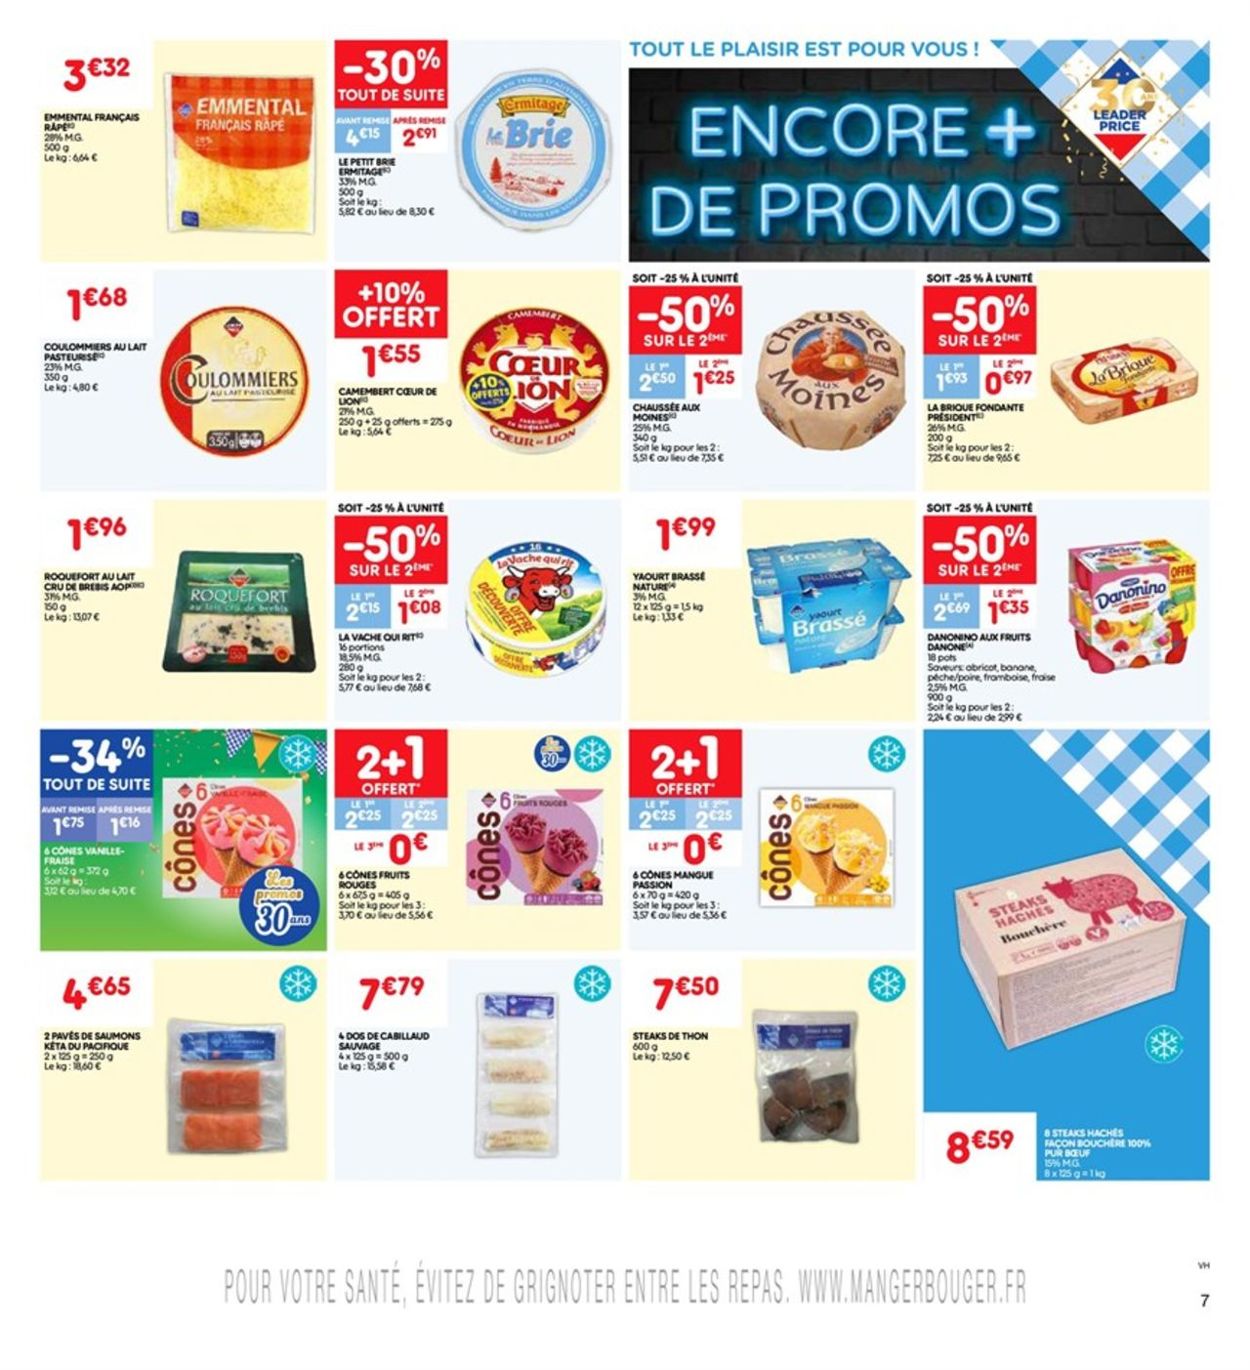 Leader Price Catalogue - 21.05-02.06.2019 (Page 7)